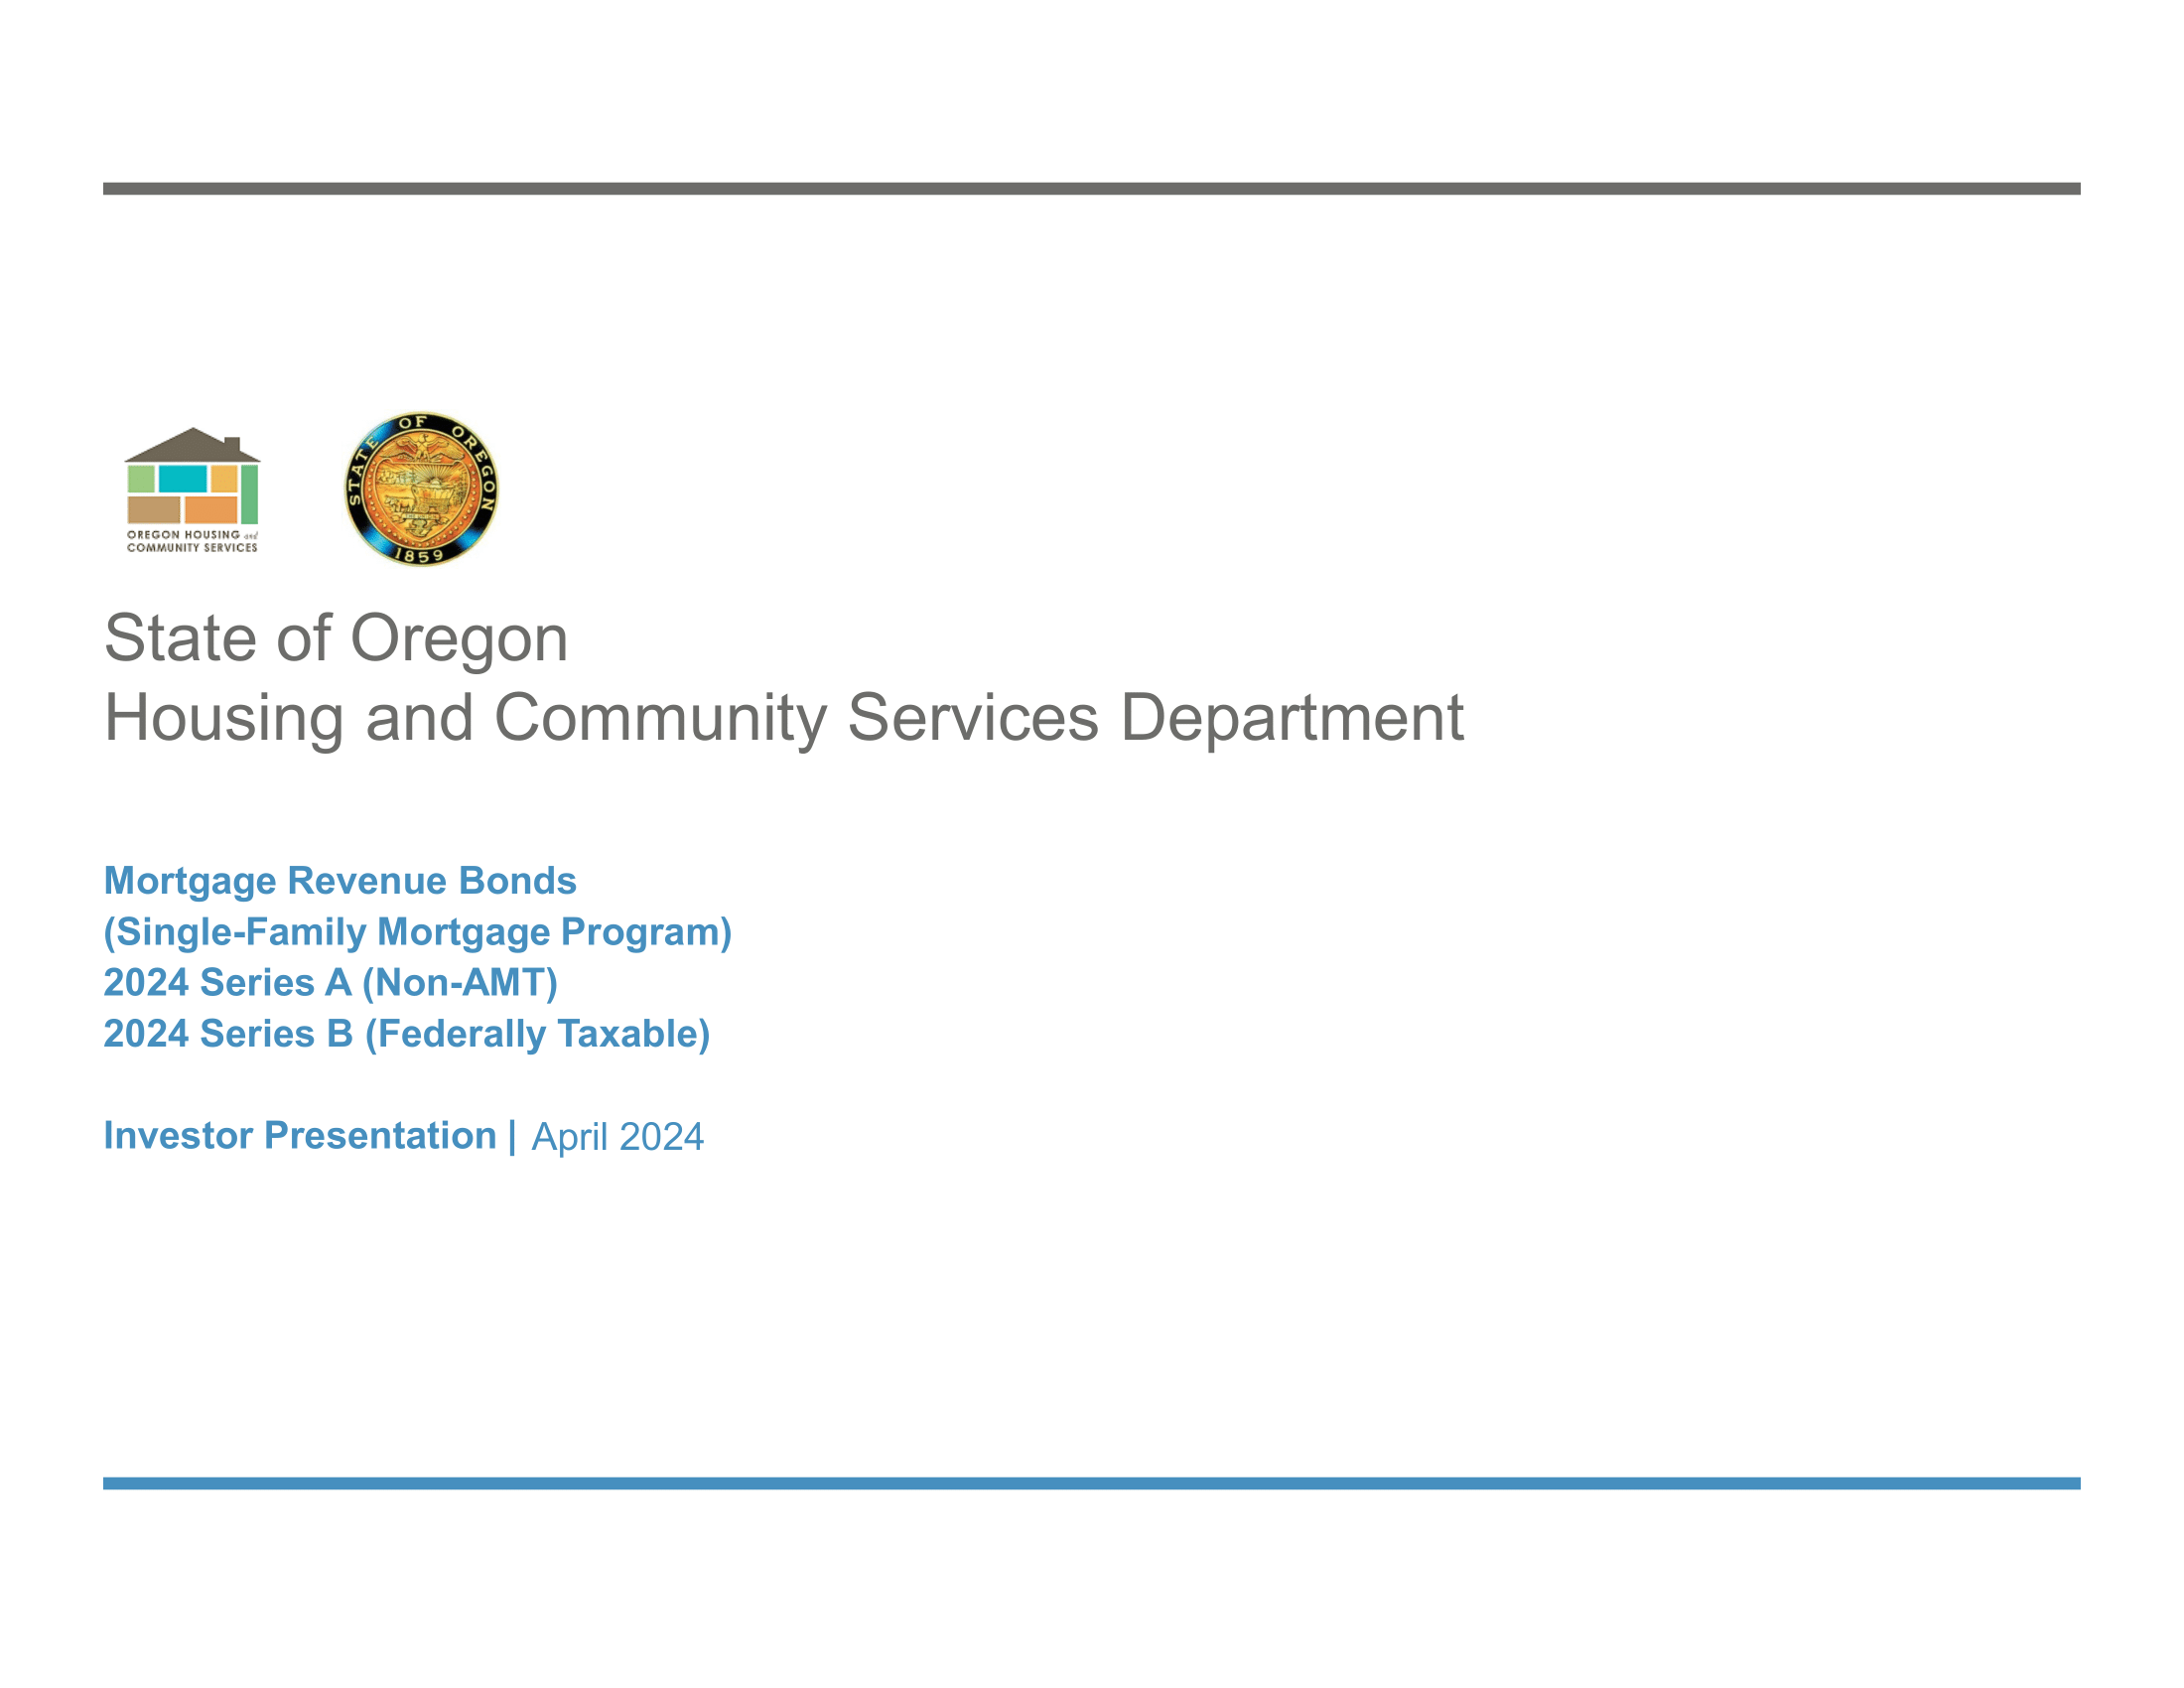 Roadshow for State of Oregon